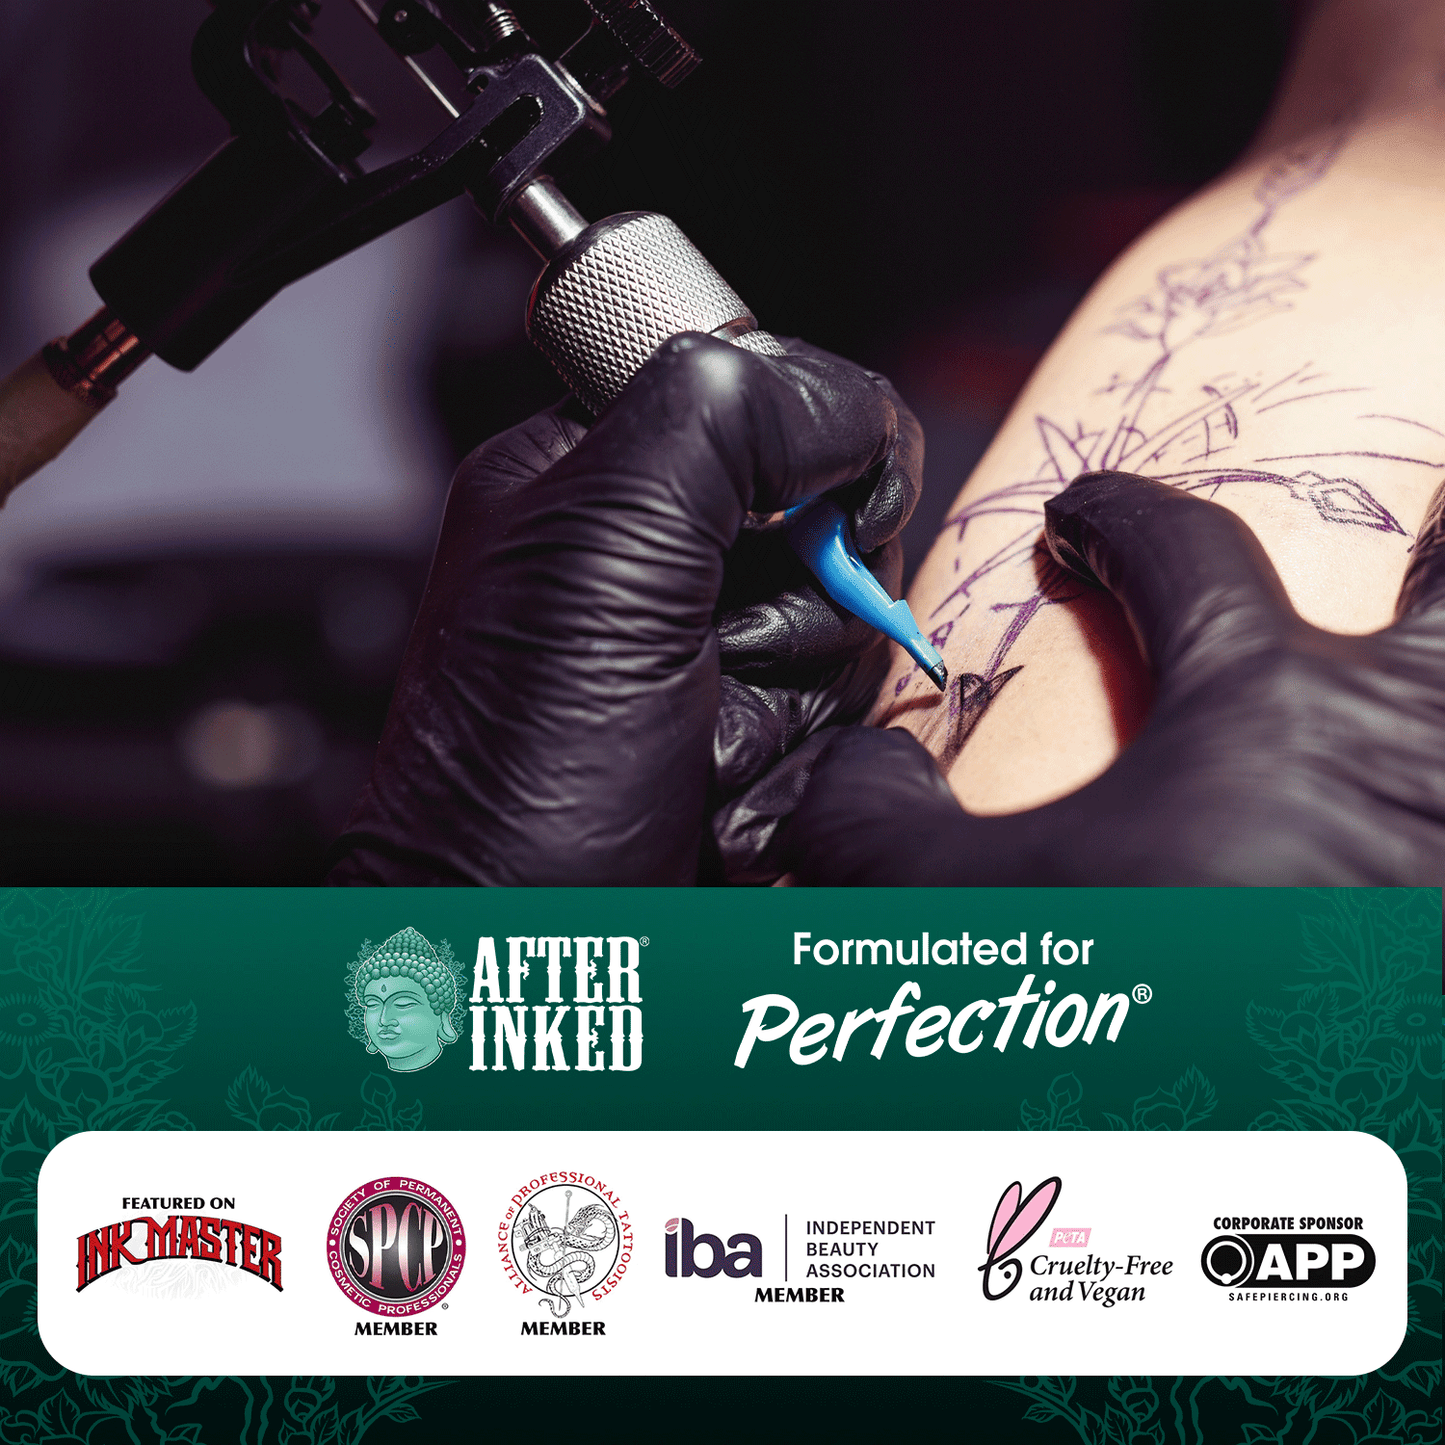 Tattoo aftercare. Daily moisture. Make After Inked a part of your daily skin care routine to help your skin maintain its natural moisture and keep your tattoos vibrant.